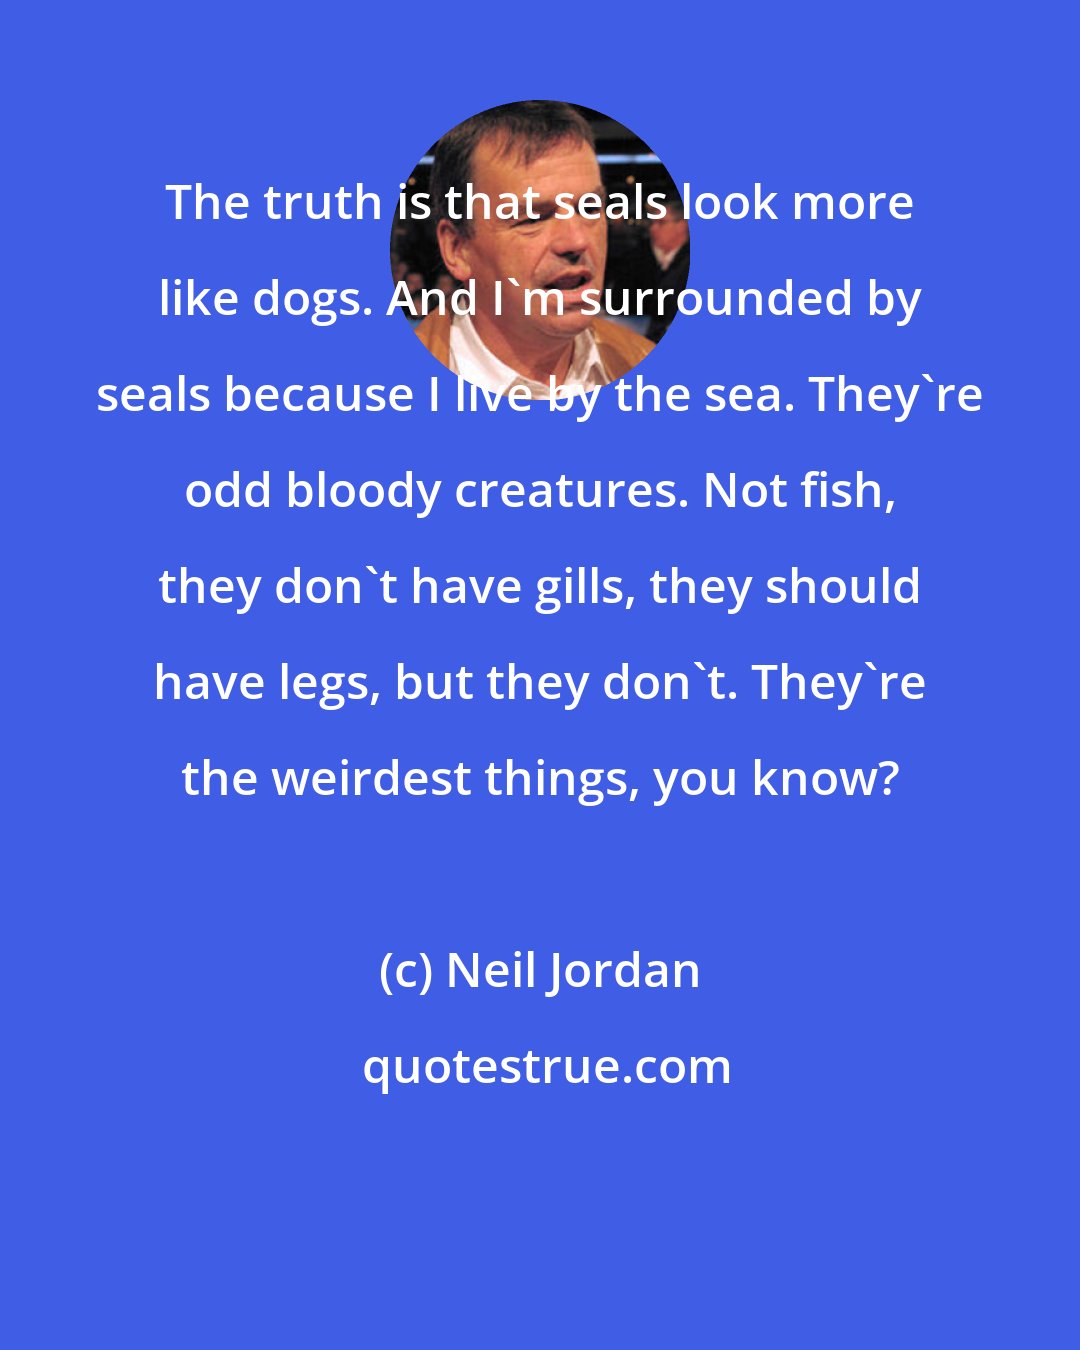 Neil Jordan: The truth is that seals look more like dogs. And I'm surrounded by seals because I live by the sea. They're odd bloody creatures. Not fish, they don't have gills, they should have legs, but they don't. They're the weirdest things, you know?